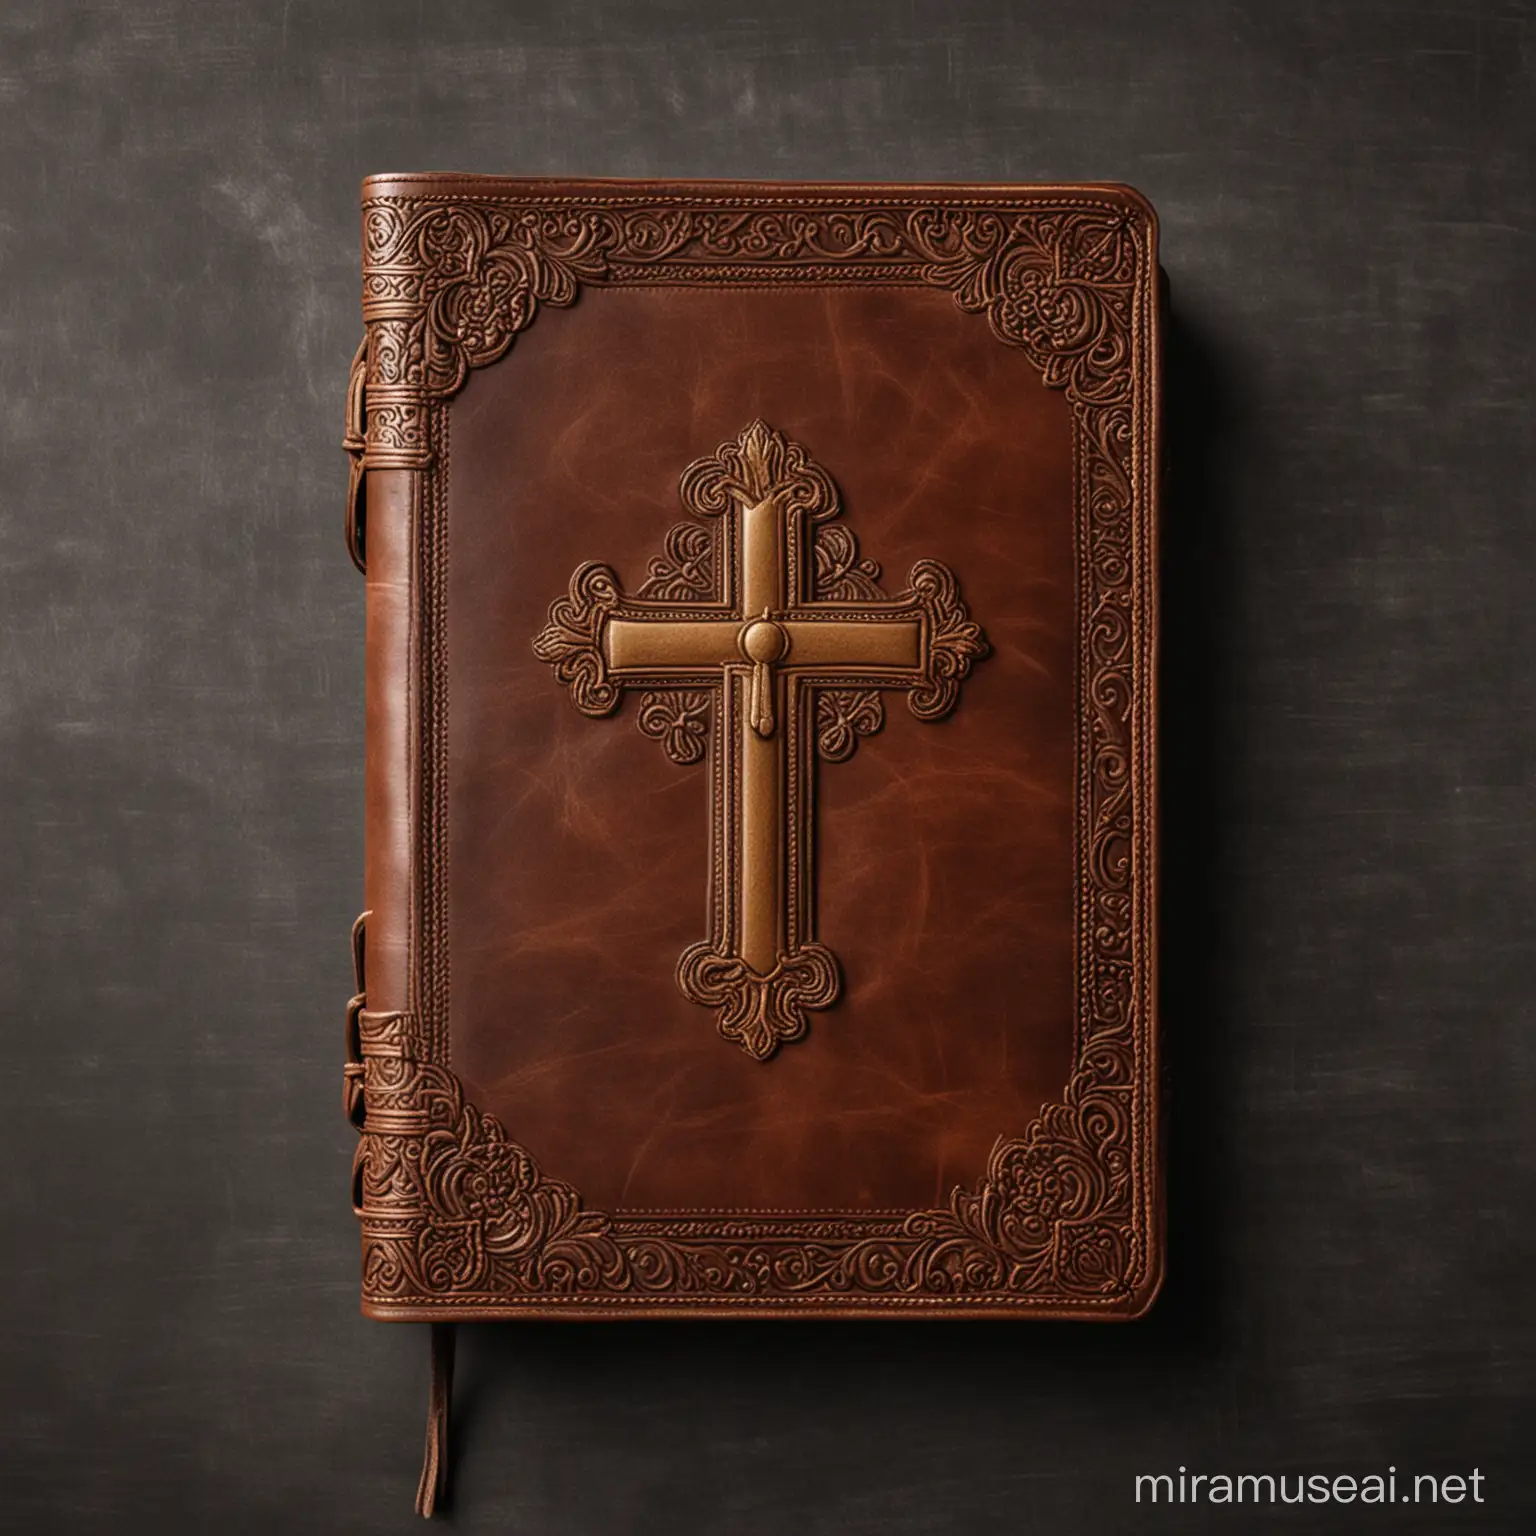 Elegant Bible Cover with Ornate Details and Rich Symbolism